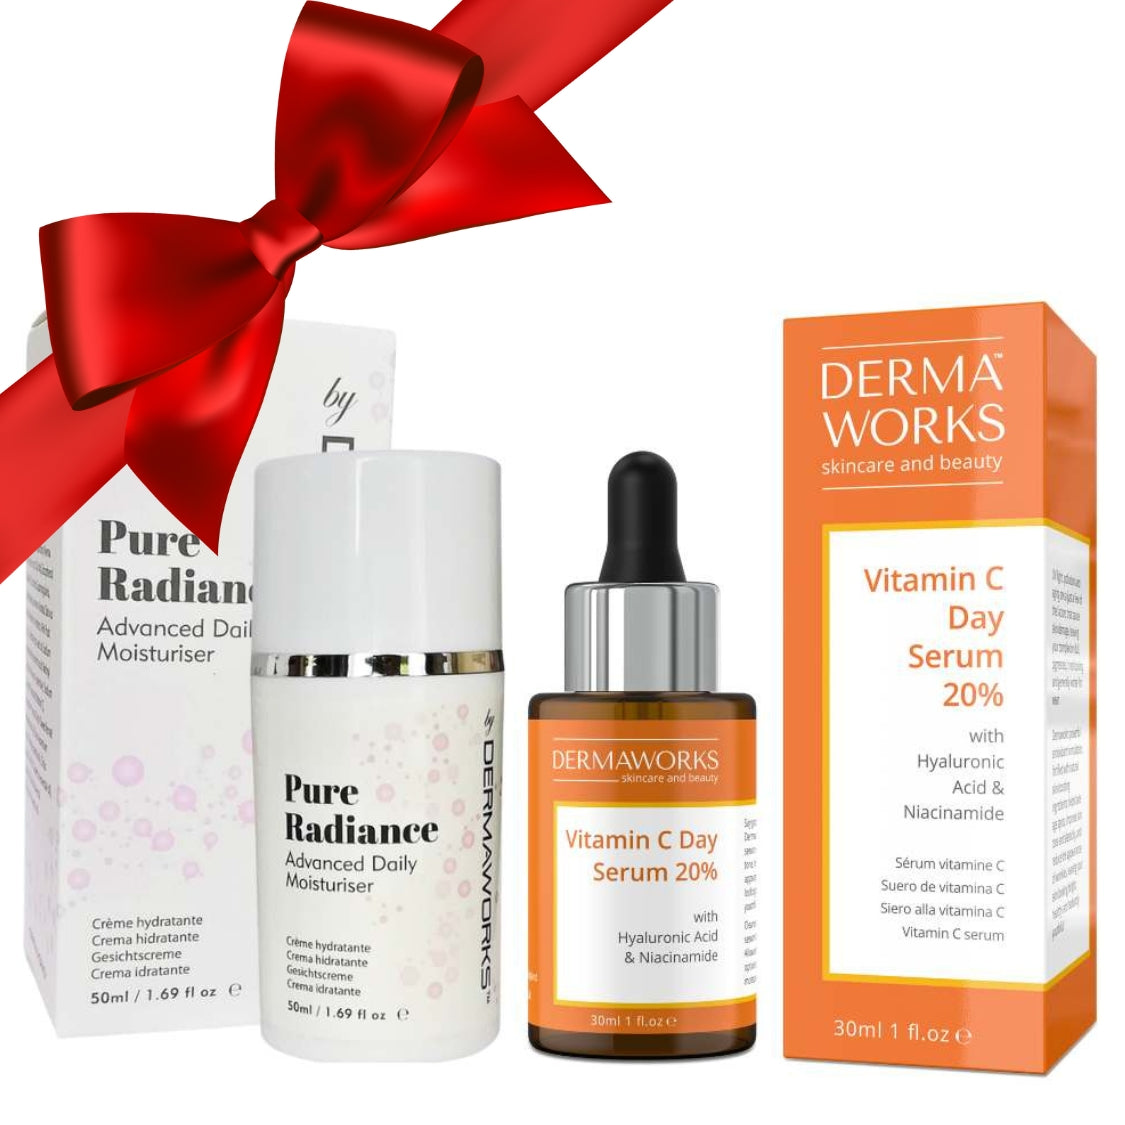 Dermaworks skin care bundle with an advanced daily moisturiser and a brightening vitamin C serum with hyaluronic acid and niacinamide.